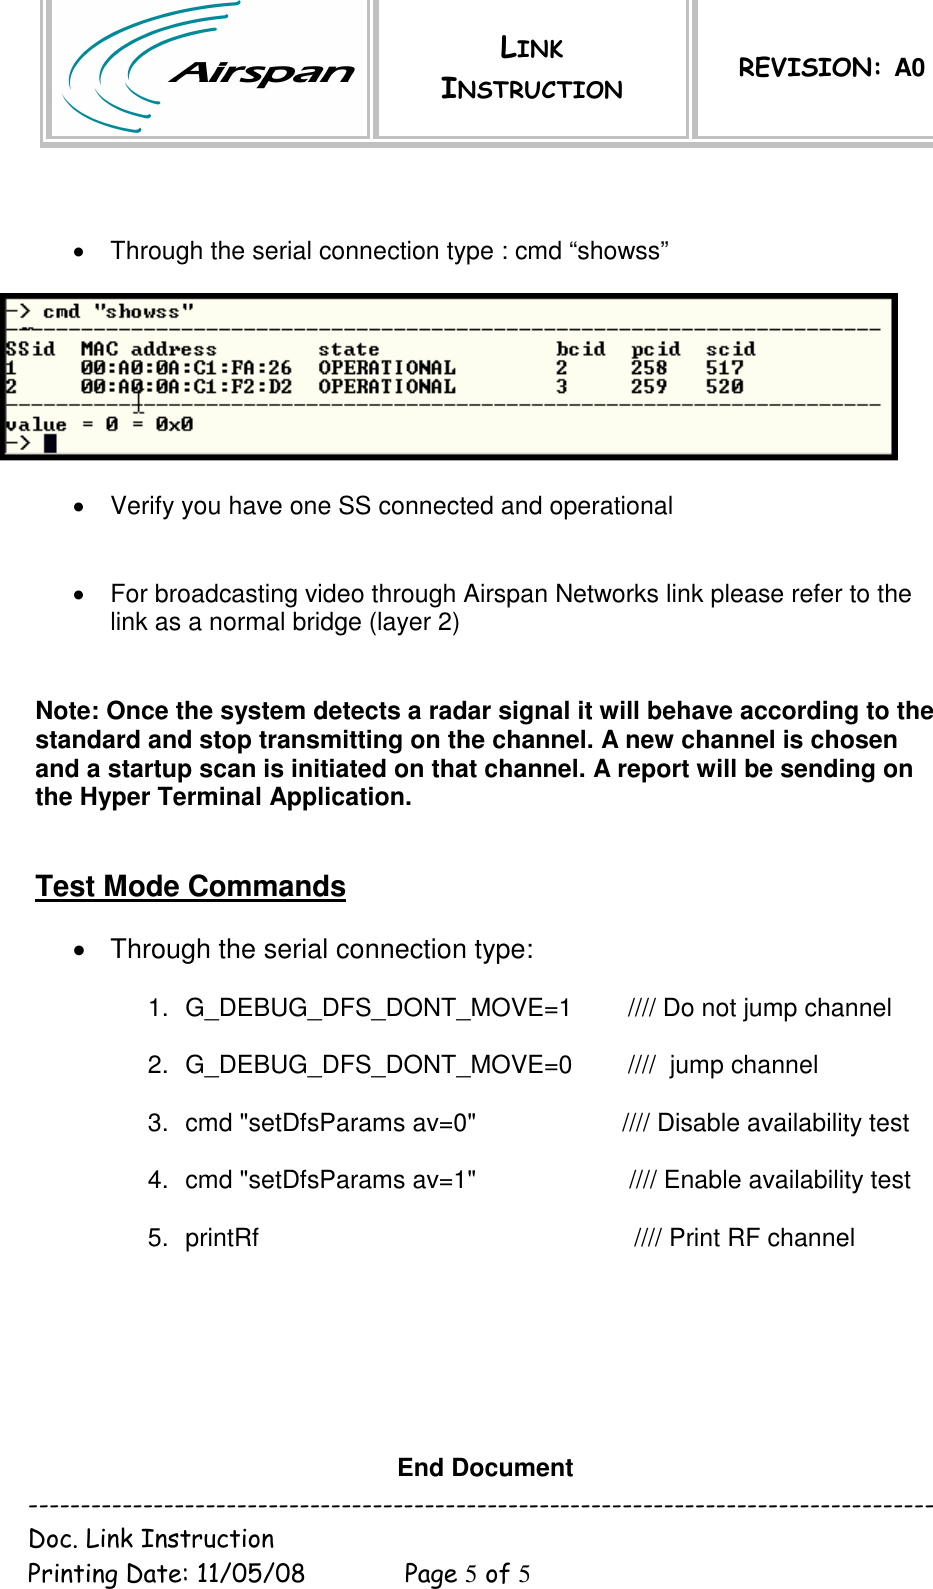  LINK INSTRUCTION REVISION: A0  --------------------------------------------------------------------------------------- Doc. Link Instruction   Printing Date: 11/05/08  Page 5 of 5    •  Through the serial connection type : cmd “showss”     •  Verify you have one SS connected and operational    •  For broadcasting video through Airspan Networks link please refer to the link as a normal bridge (layer 2)  Note: Once the system detects a radar signal it will behave according to the standard and stop transmitting on the channel. A new channel is chosen and a startup scan is initiated on that channel. A report will be sending on the Hyper Terminal Application.   Test Mode Commands  •  Through the serial connection type:  1.  G_DEBUG_DFS_DONT_MOVE=1        //// Do not jump channel  2.  G_DEBUG_DFS_DONT_MOVE=0        ////  jump channel  3.  cmd &quot;setDfsParams av=0&quot;                     //// Disable availability test  4.  cmd &quot;setDfsParams av=1&quot;                      //// Enable availability test  5.  printRf                                                      //// Print RF channel        End Document 